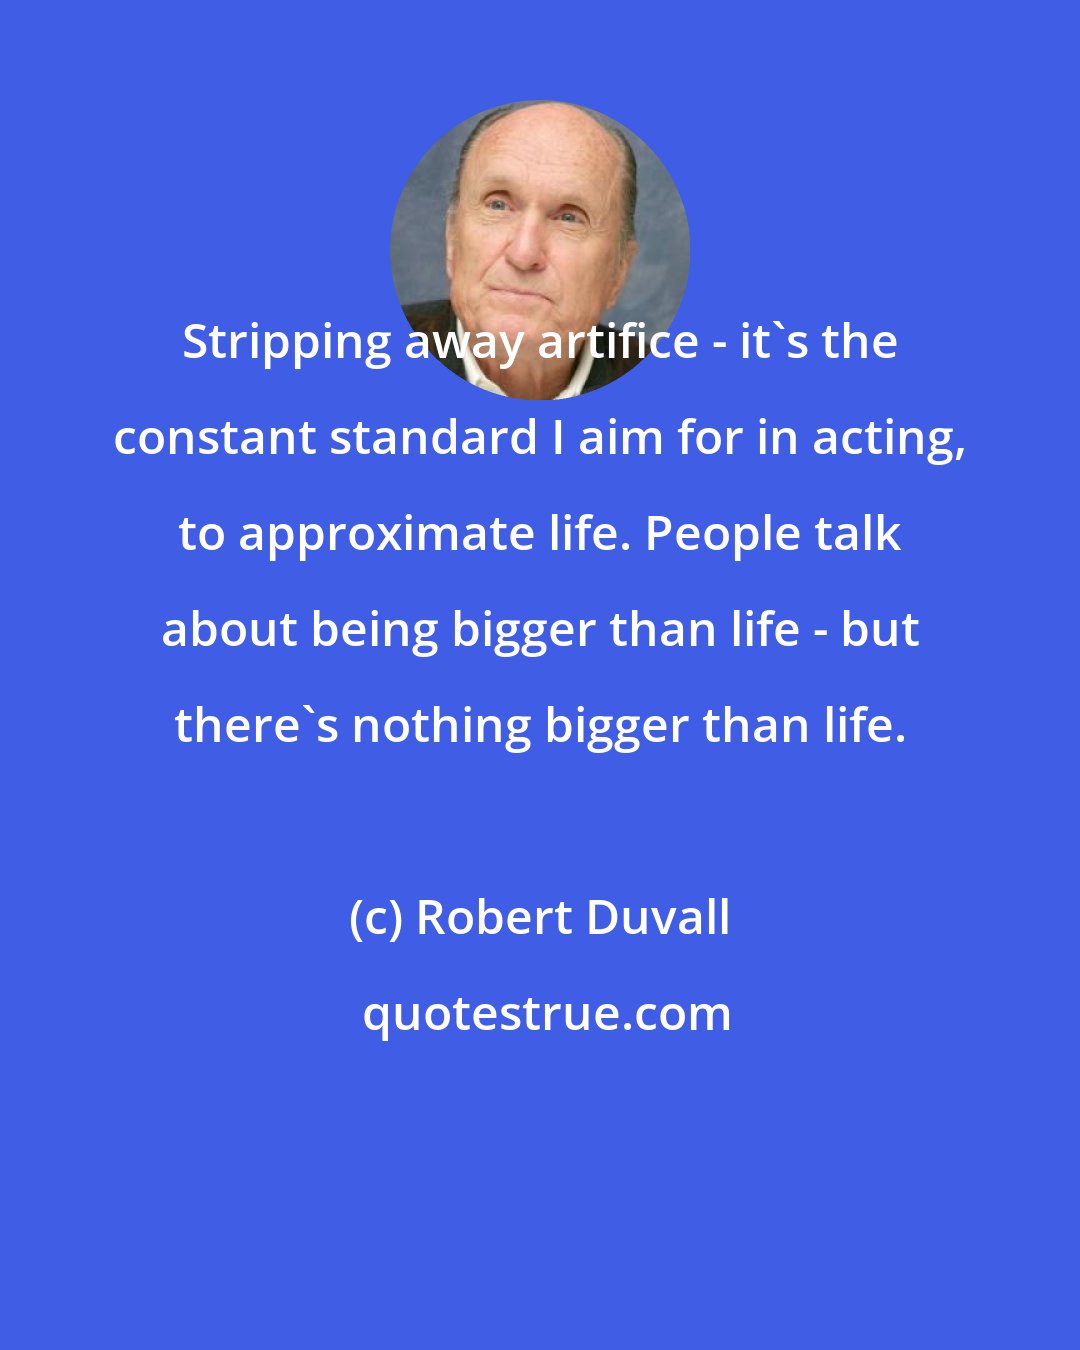 Robert Duvall: Stripping away artifice - it's the constant standard I aim for in acting, to approximate life. People talk about being bigger than life - but there's nothing bigger than life.